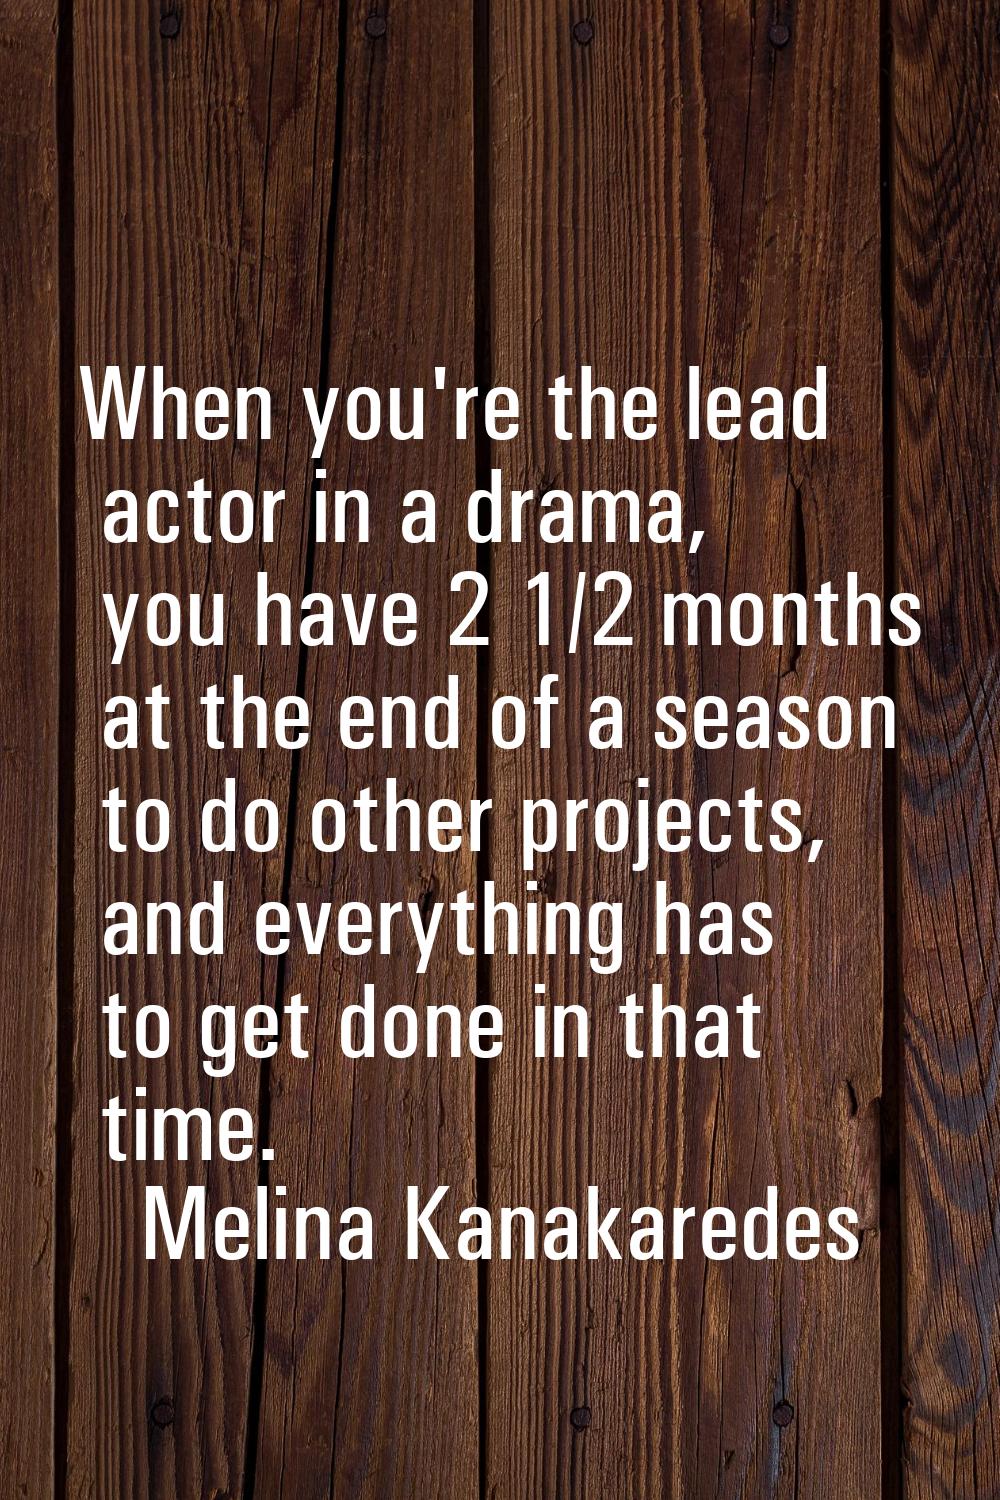 When you're the lead actor in a drama, you have 2 1/2 months at the end of a season to do other pro